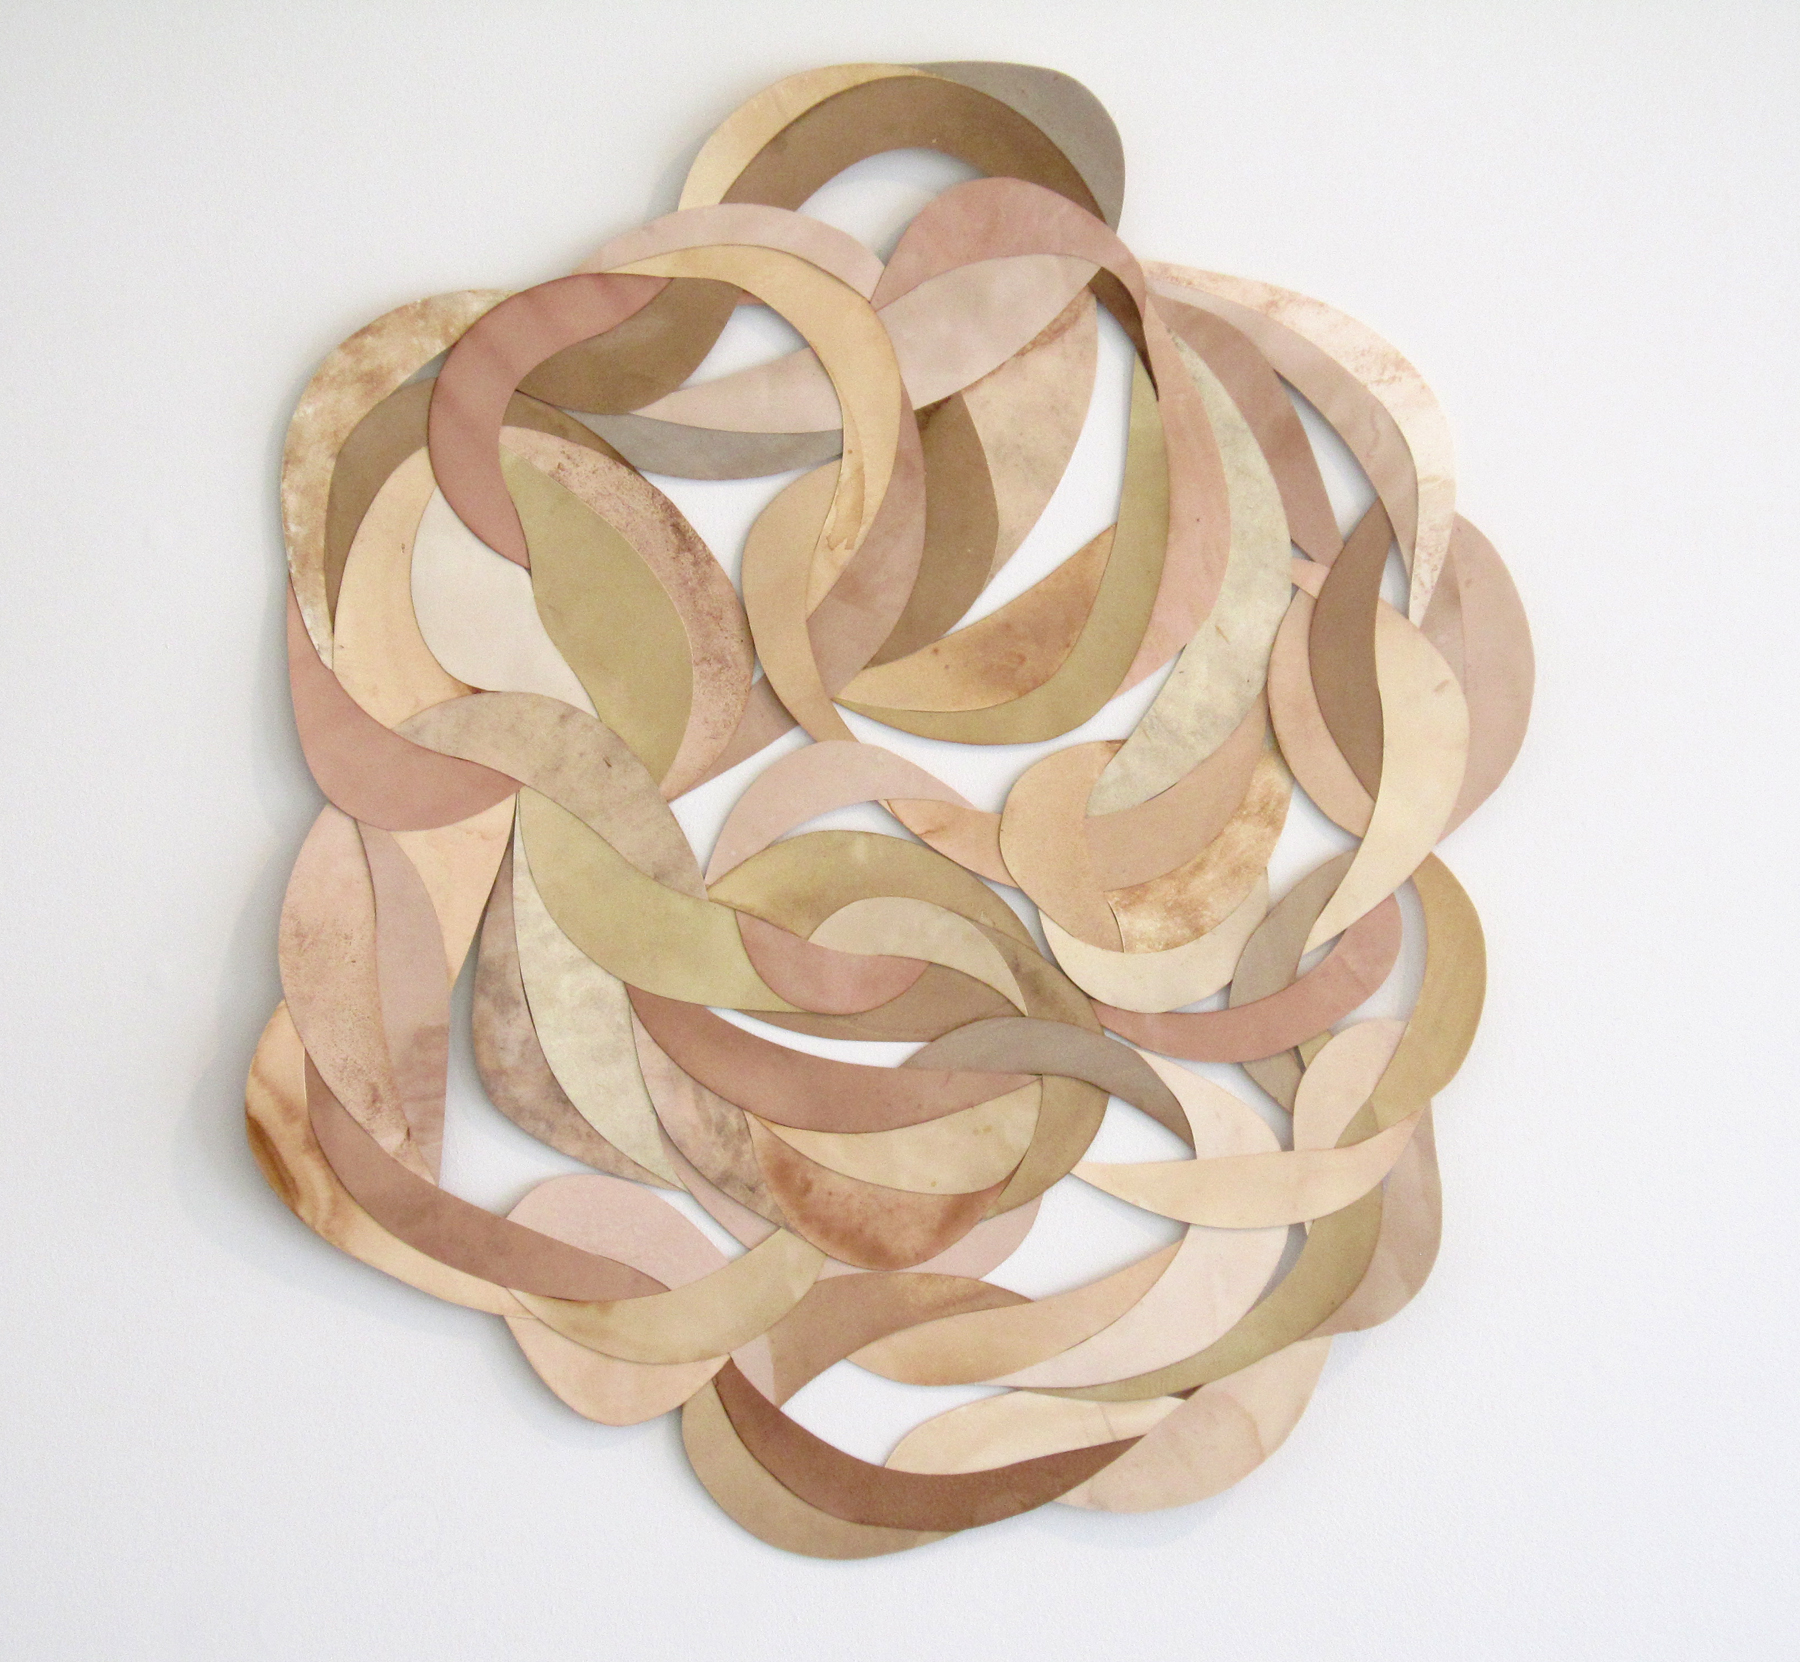   MOLLY SMITH   Mass,&nbsp; 2013, paper and natural dyes, 32" x 29" 